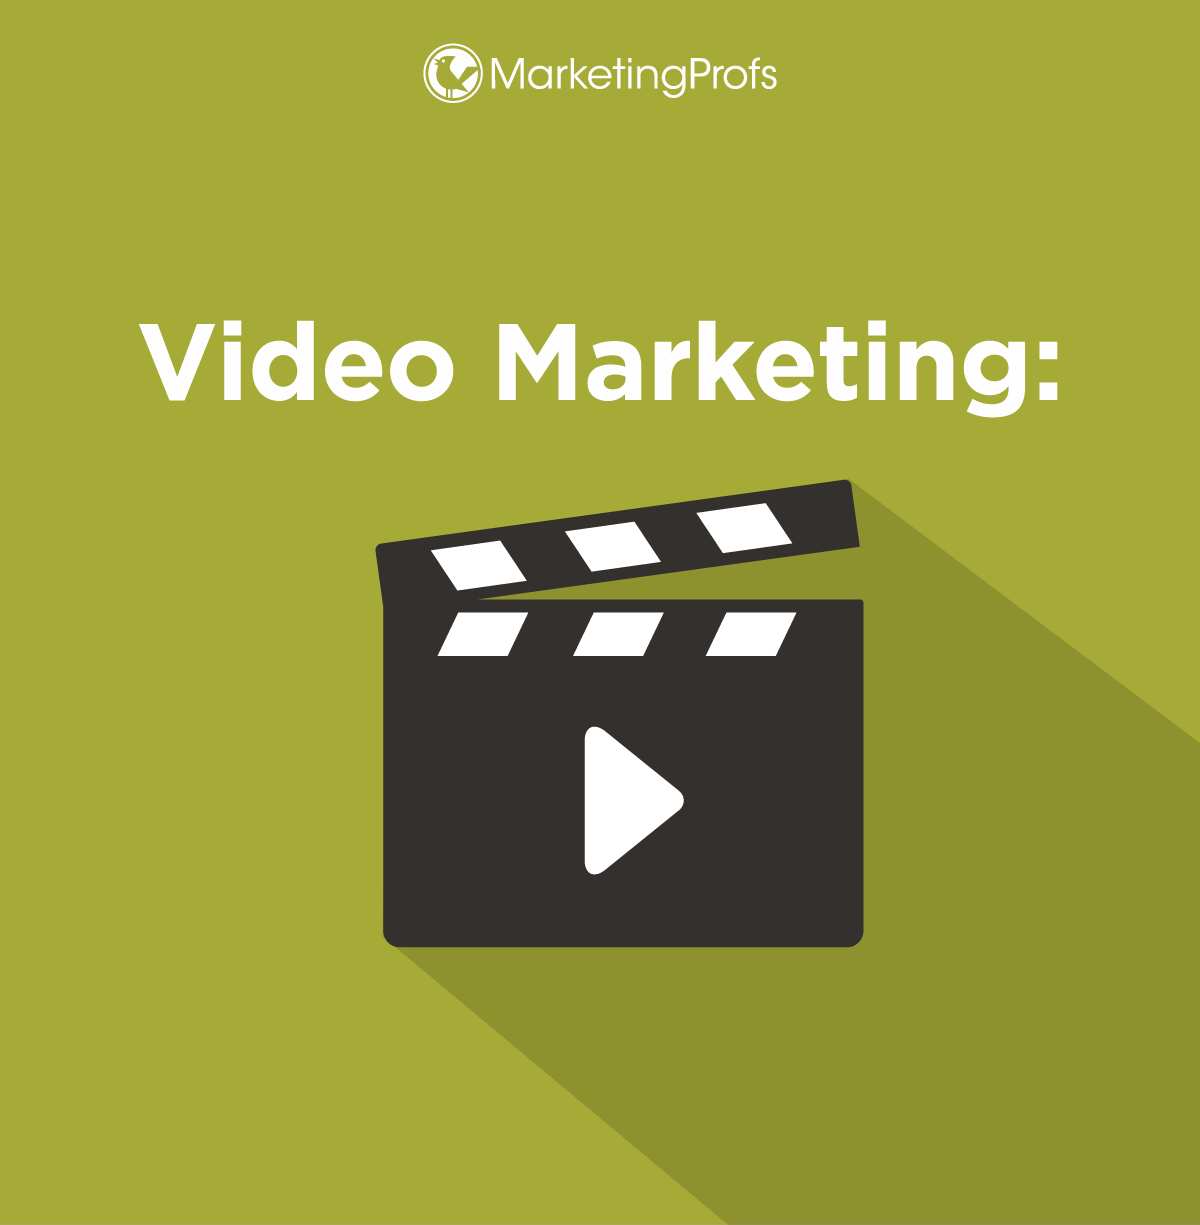 Unleash the Power of Video Marketing for Your Business: Five Ideas for Video Content